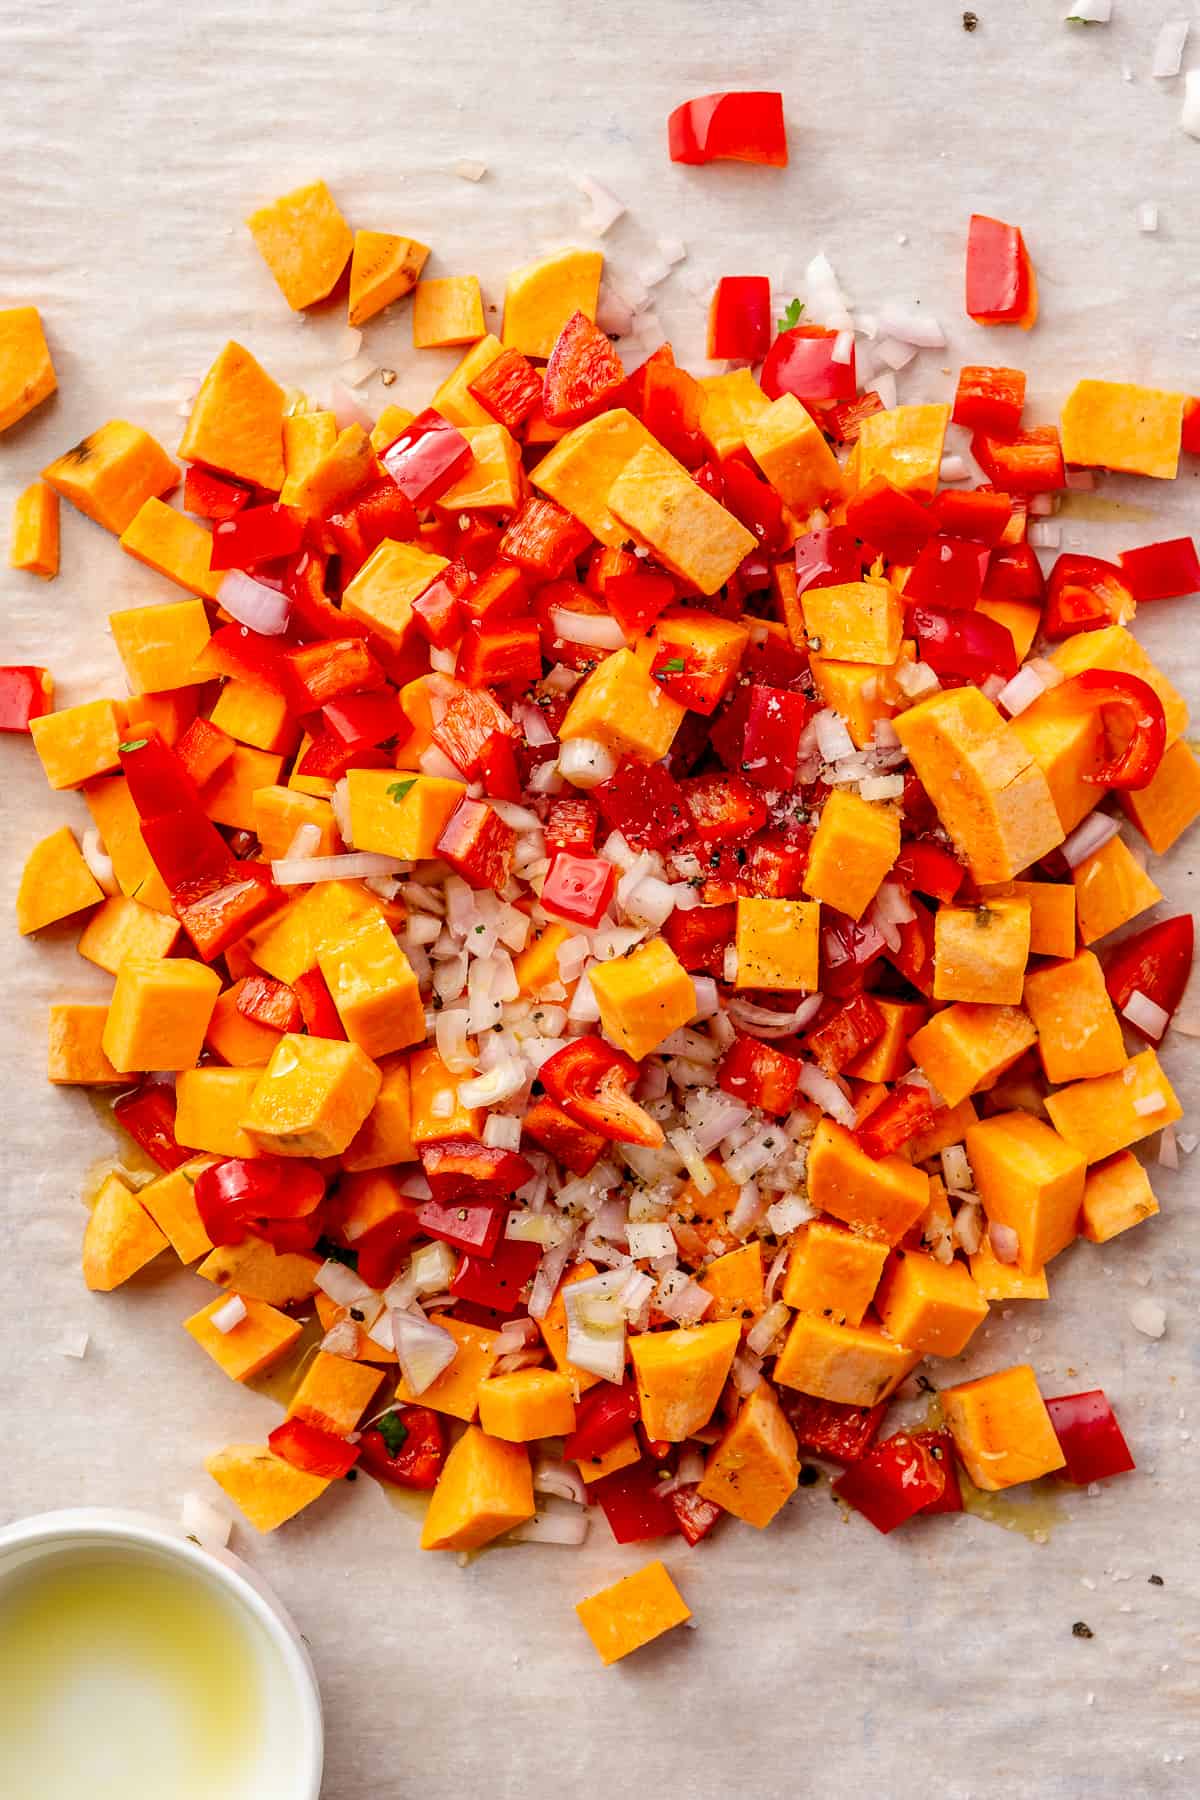 Diced sweet potato, bell peppers, and shallot piled on a parchment-lined sheet pan.